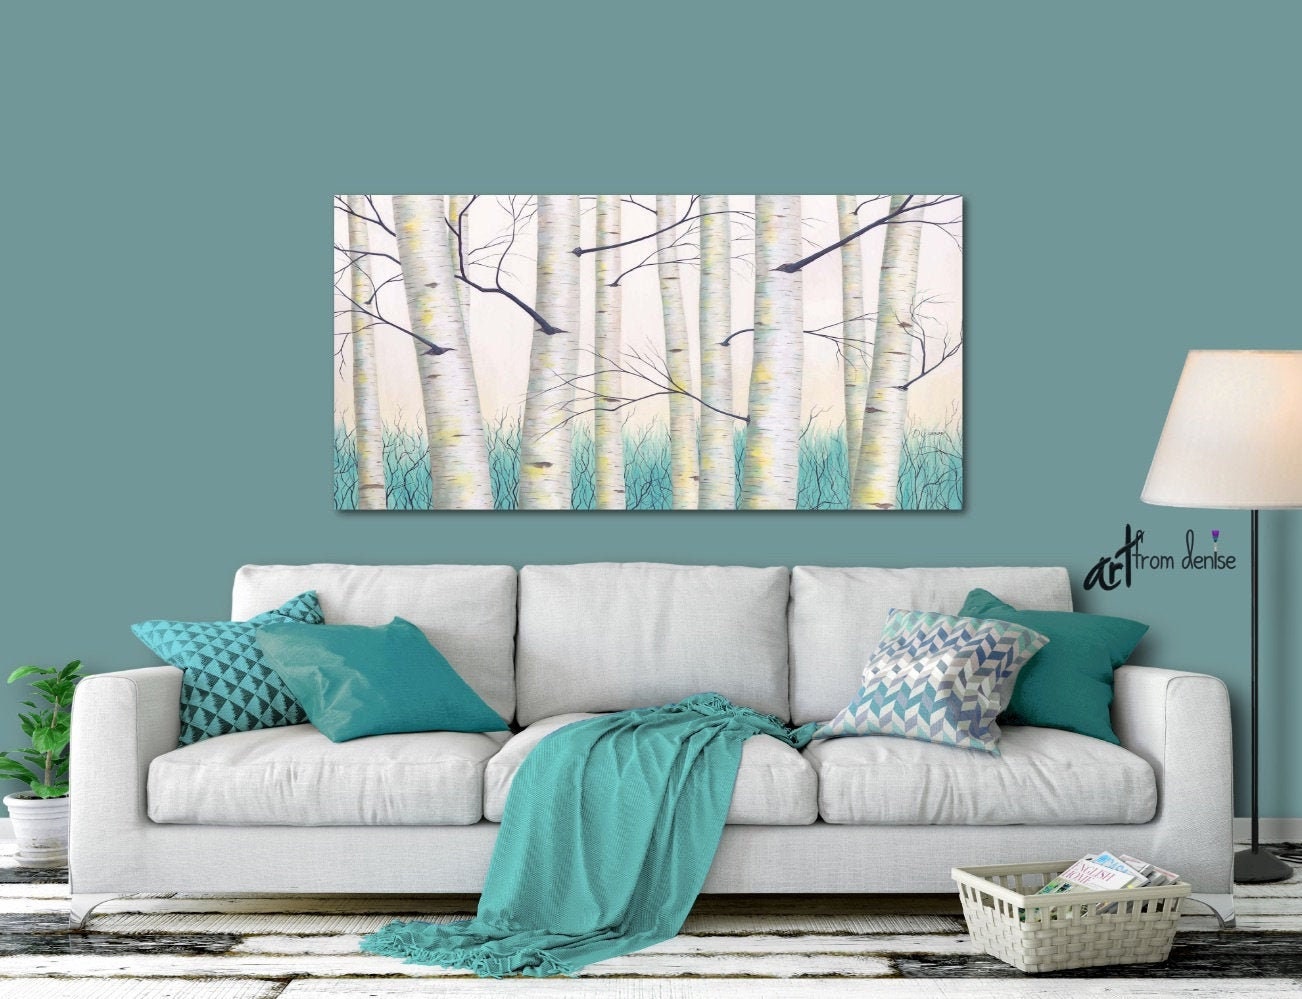 Aspen Tree Landscape Painting Aqua Teal Yellow Gray and White - Etsy